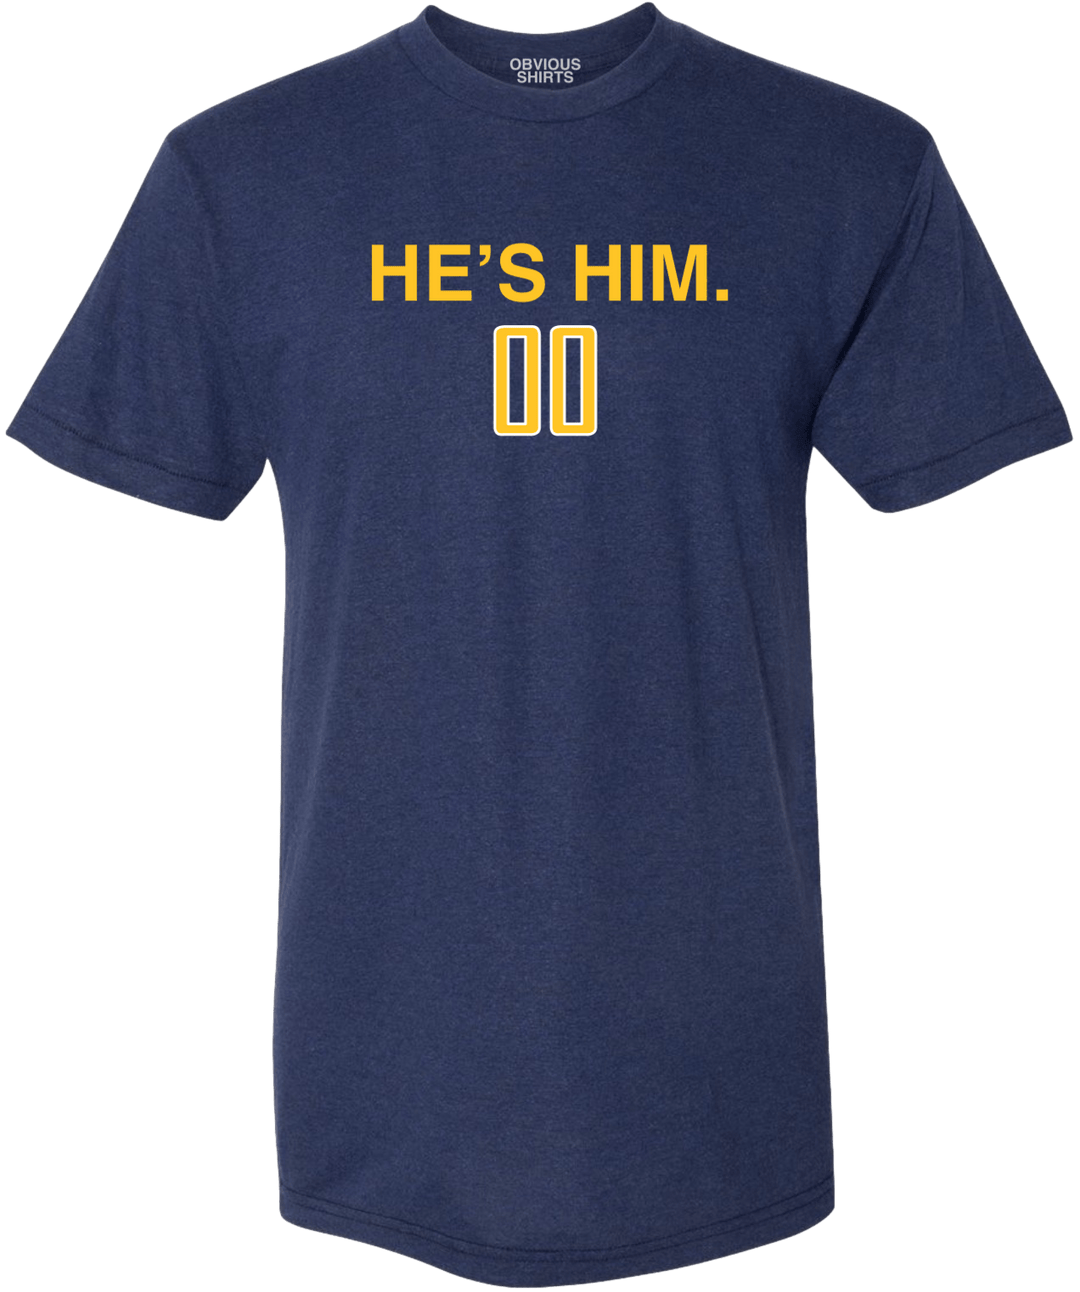 HE'S HIM. - OBVIOUS SHIRTS